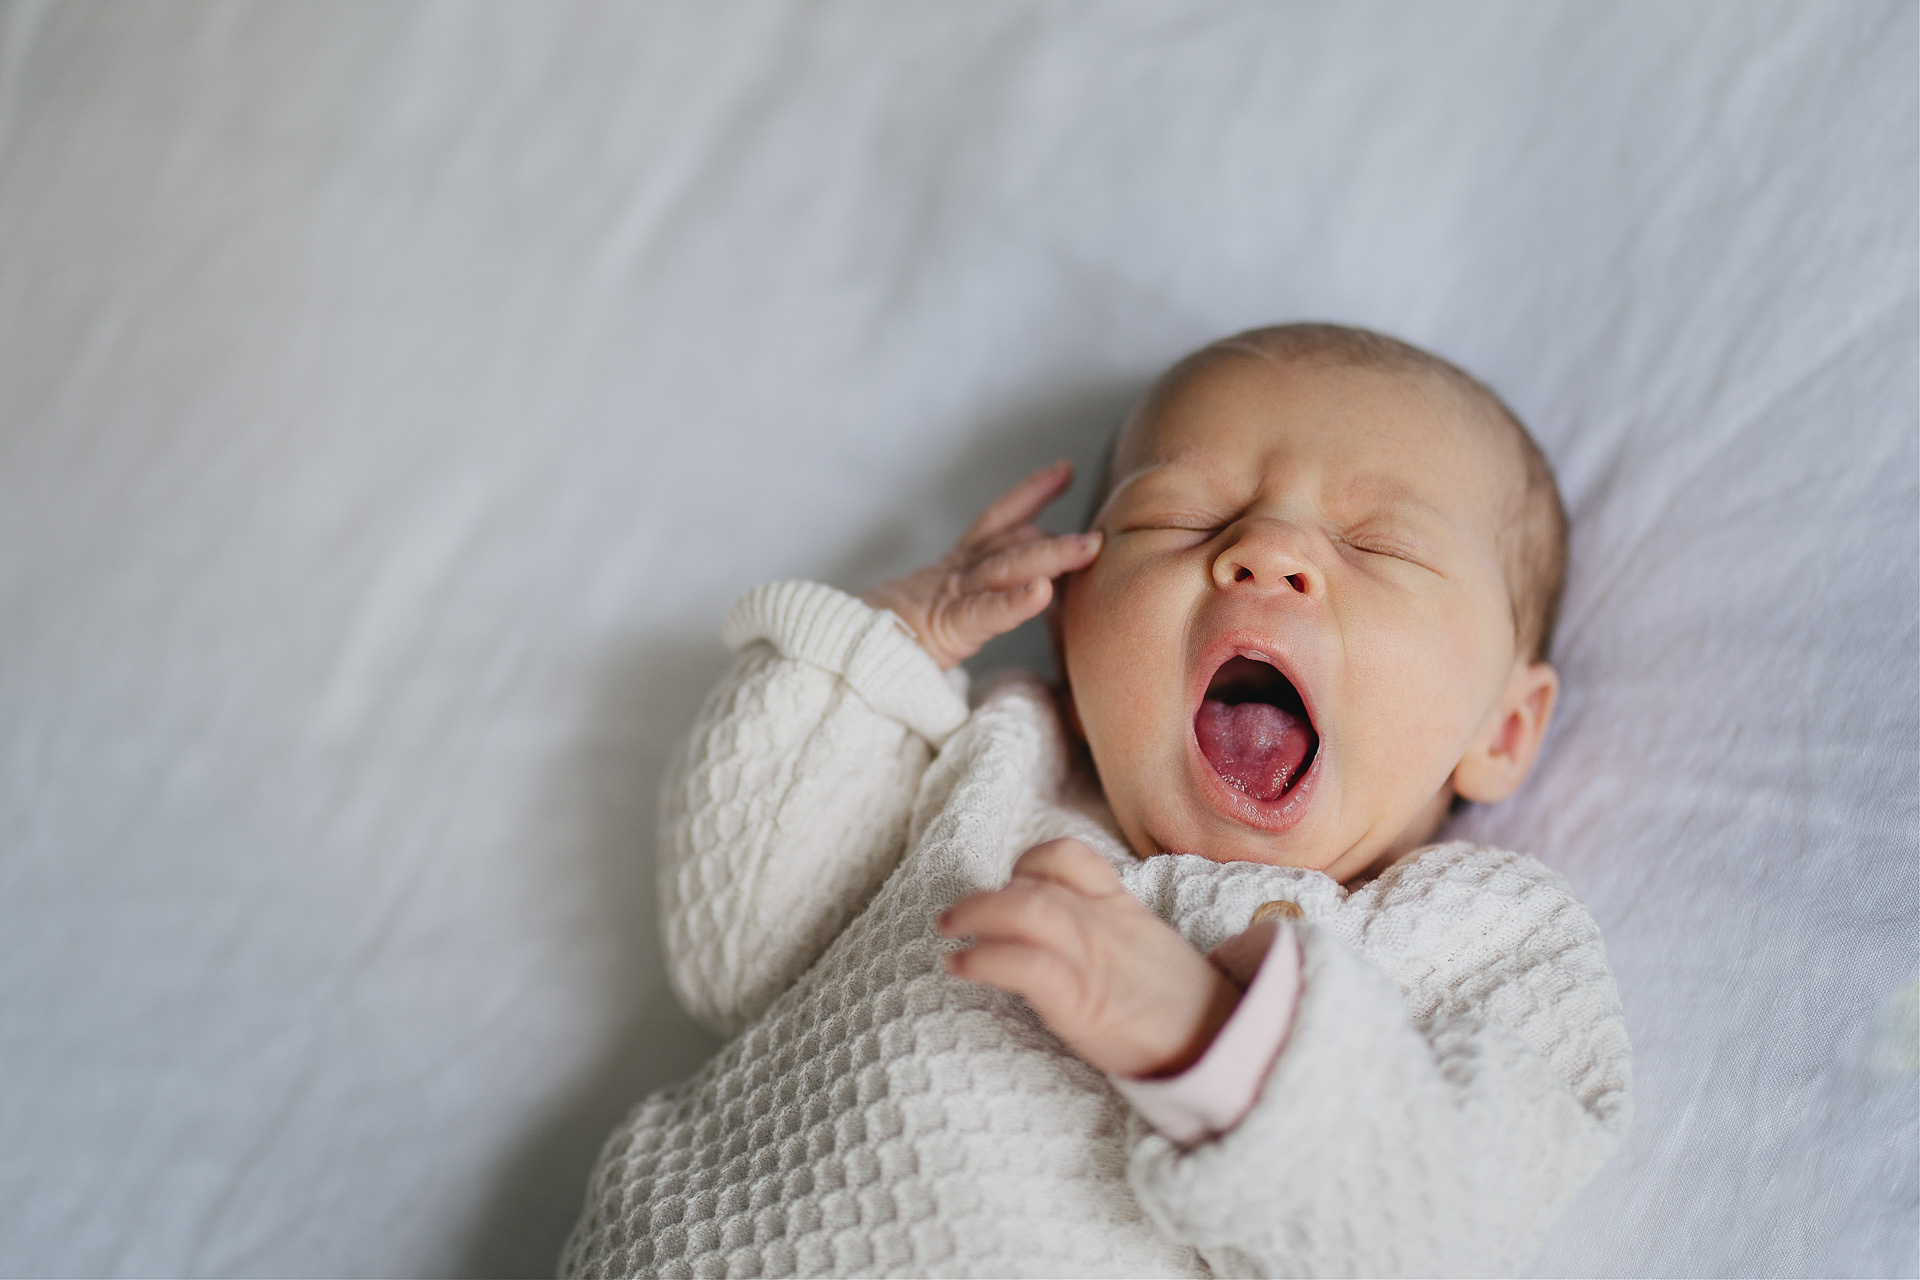 A yawning newborn baby lying on a bed at home